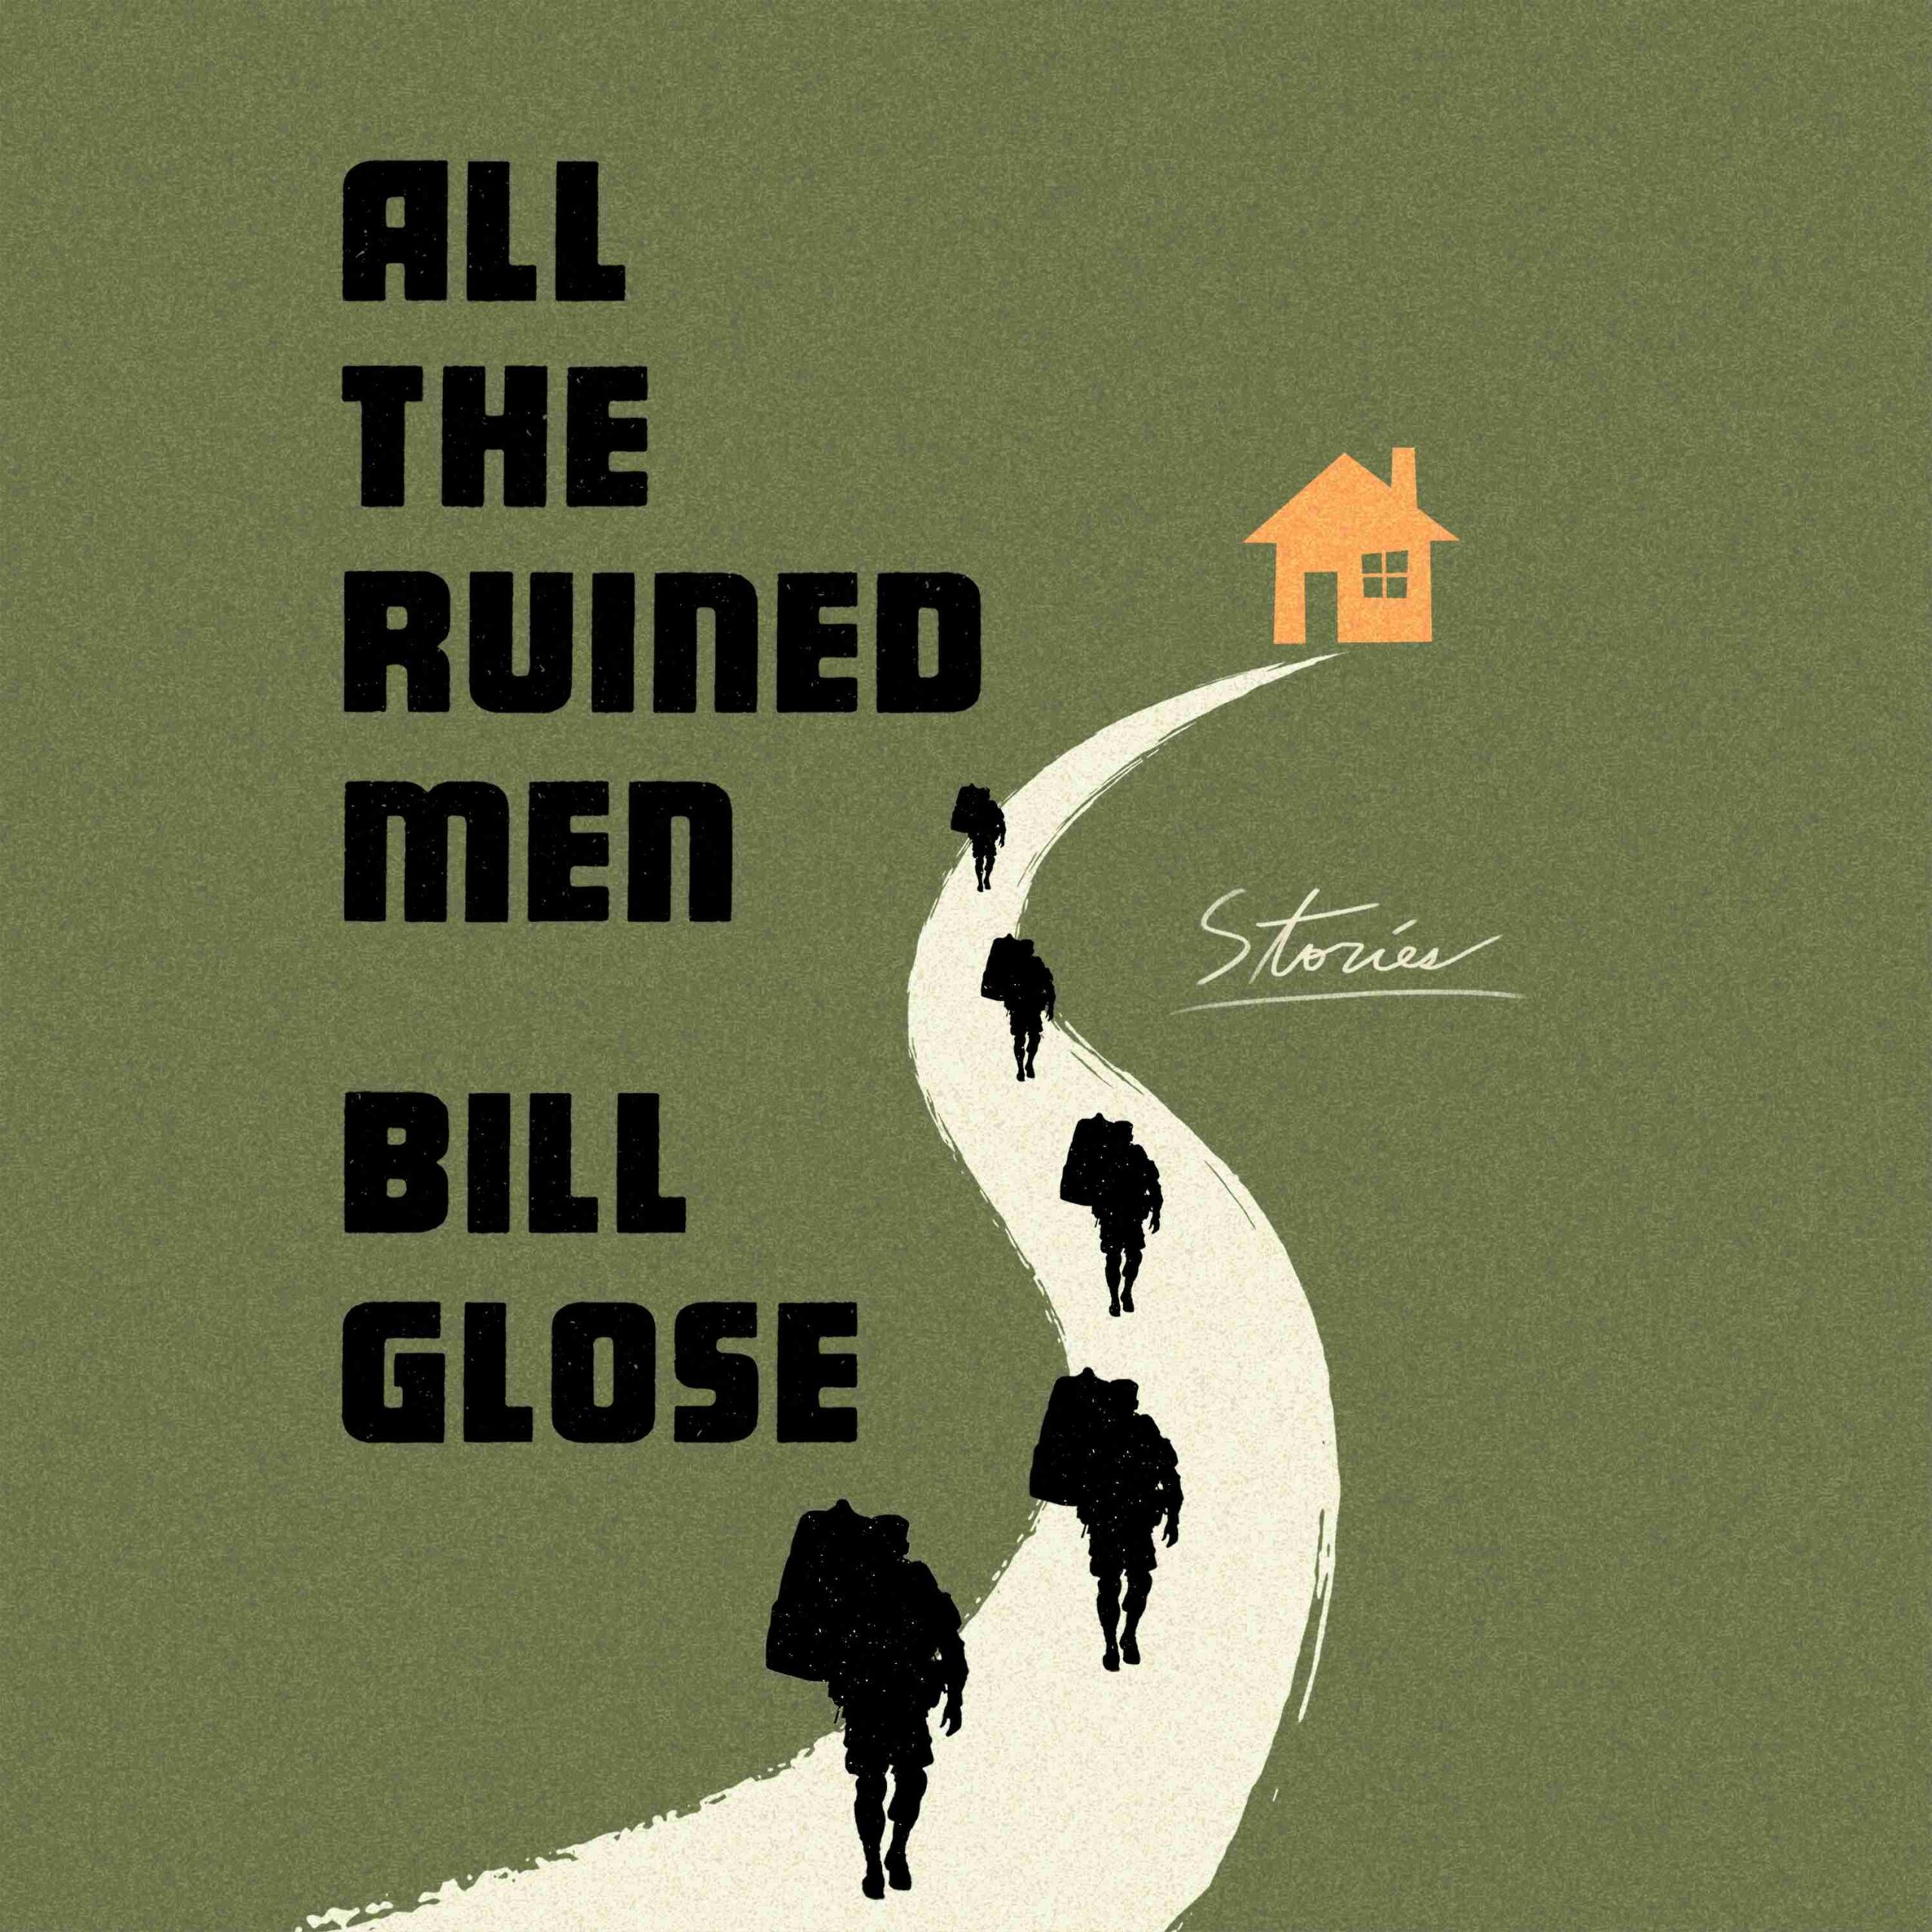 All the Ruined Men byBill Glose Audiobook. 19.99 USD